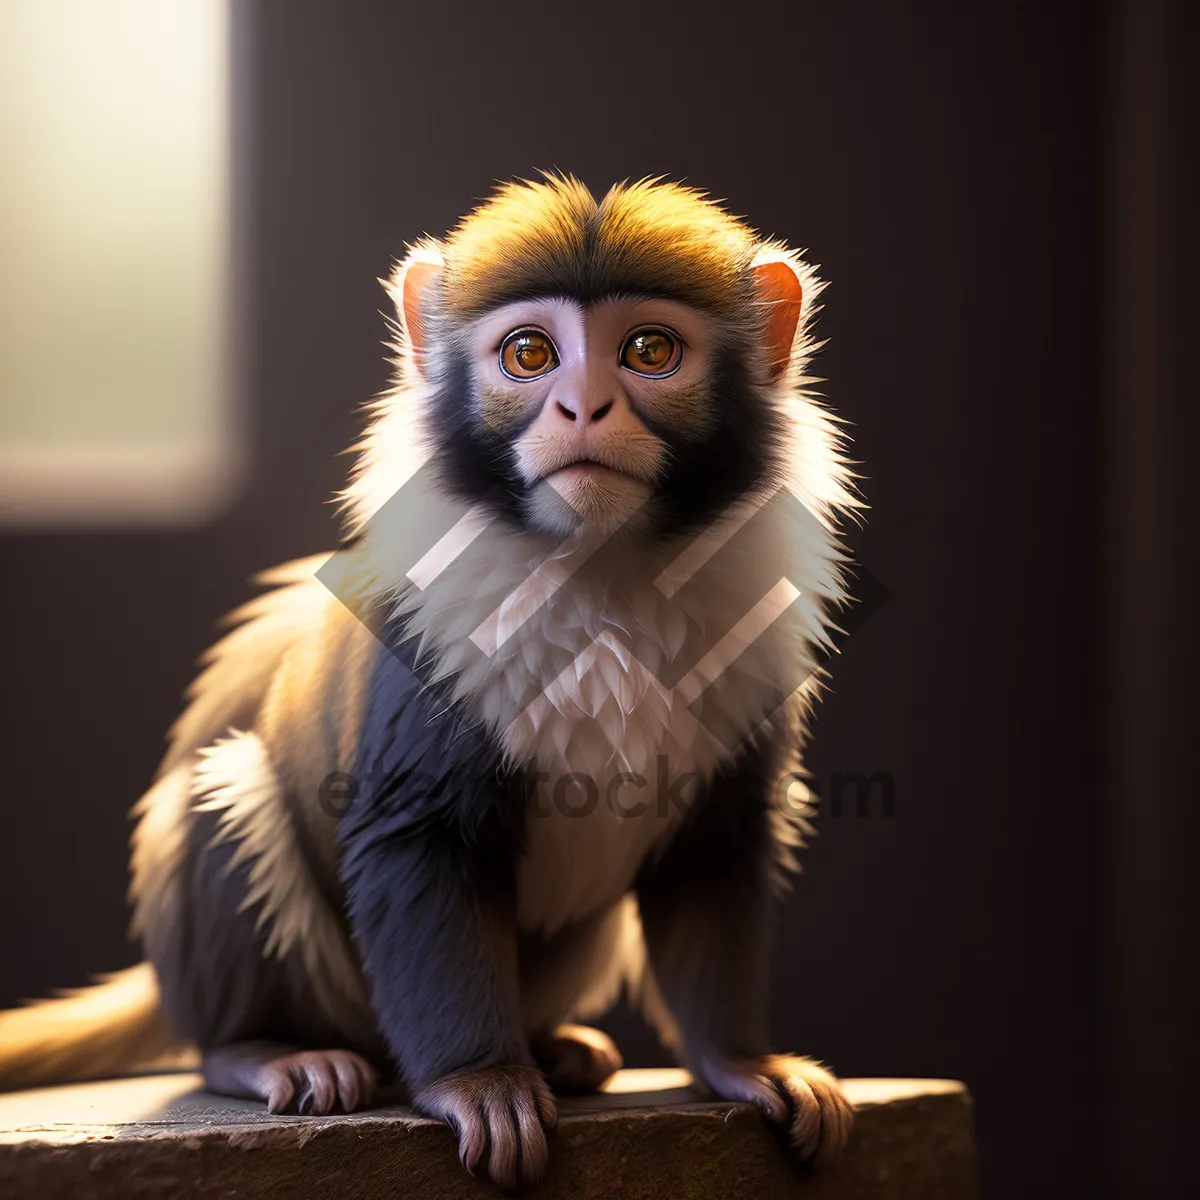 Picture of Wild Primate in Zoo: Majestic Macaque Monkey